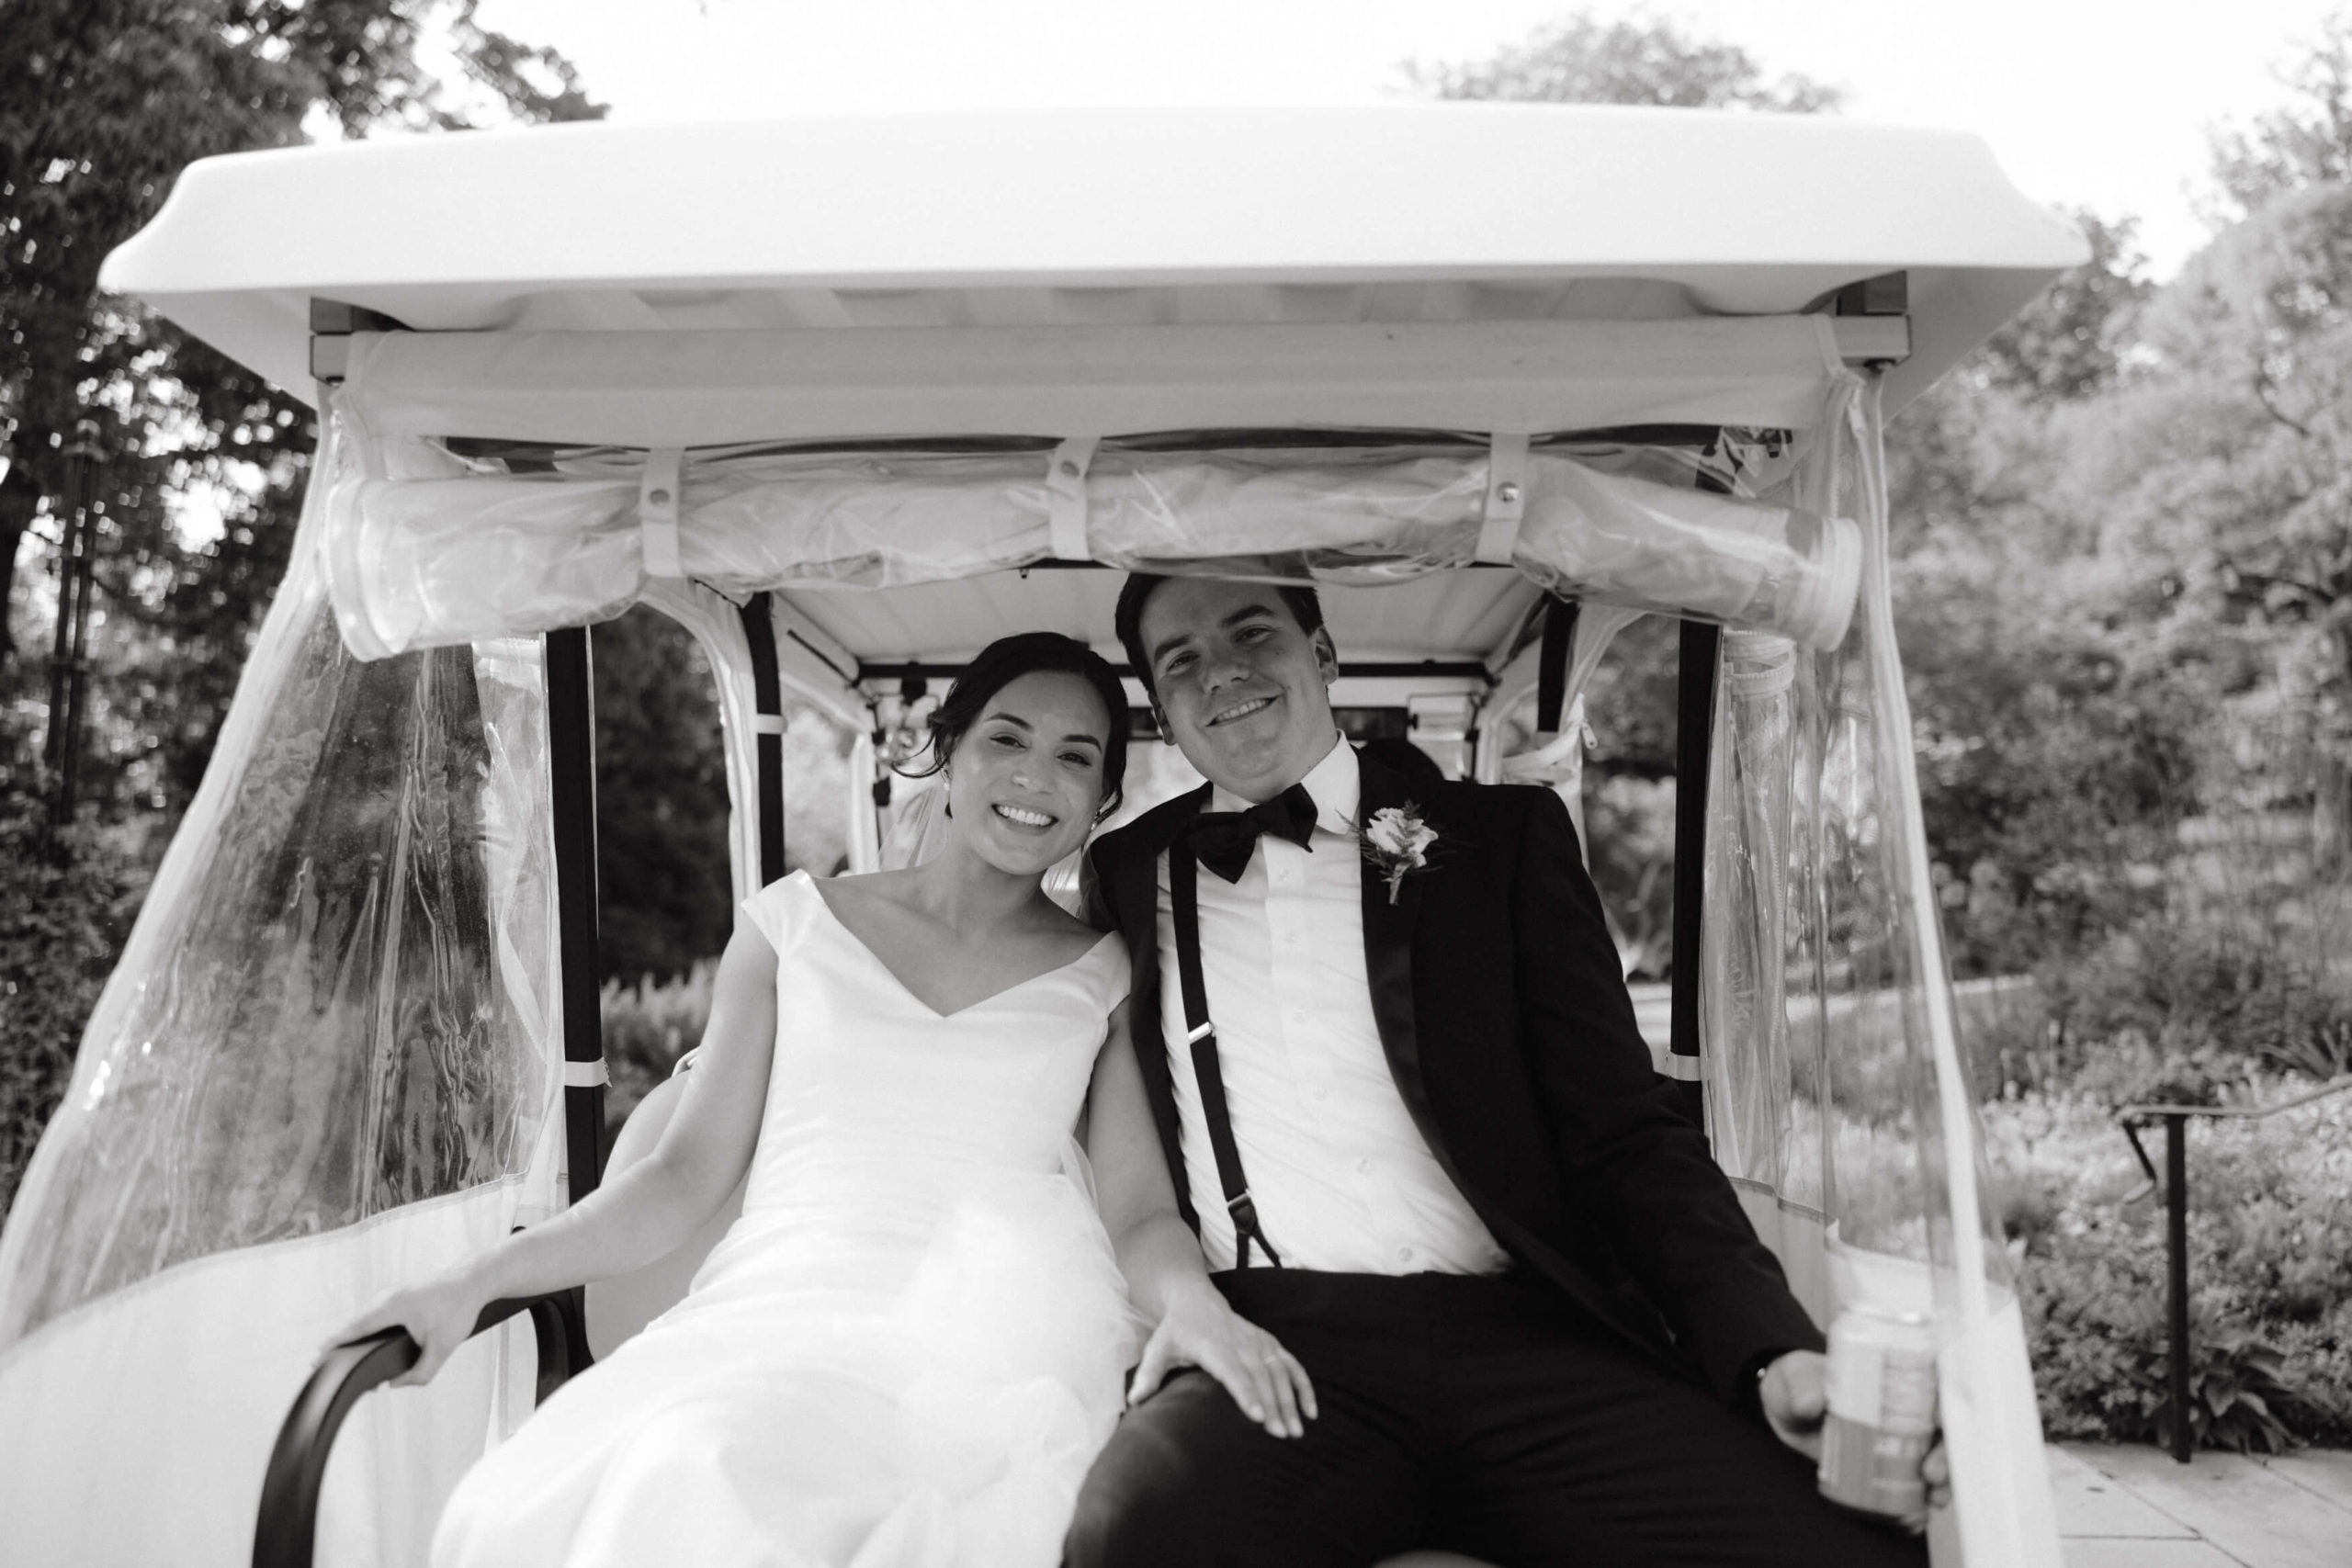 The bride and groom are happily riding the golf cart, going to their wedding. Destination wedding image by Jenny Fu Studio